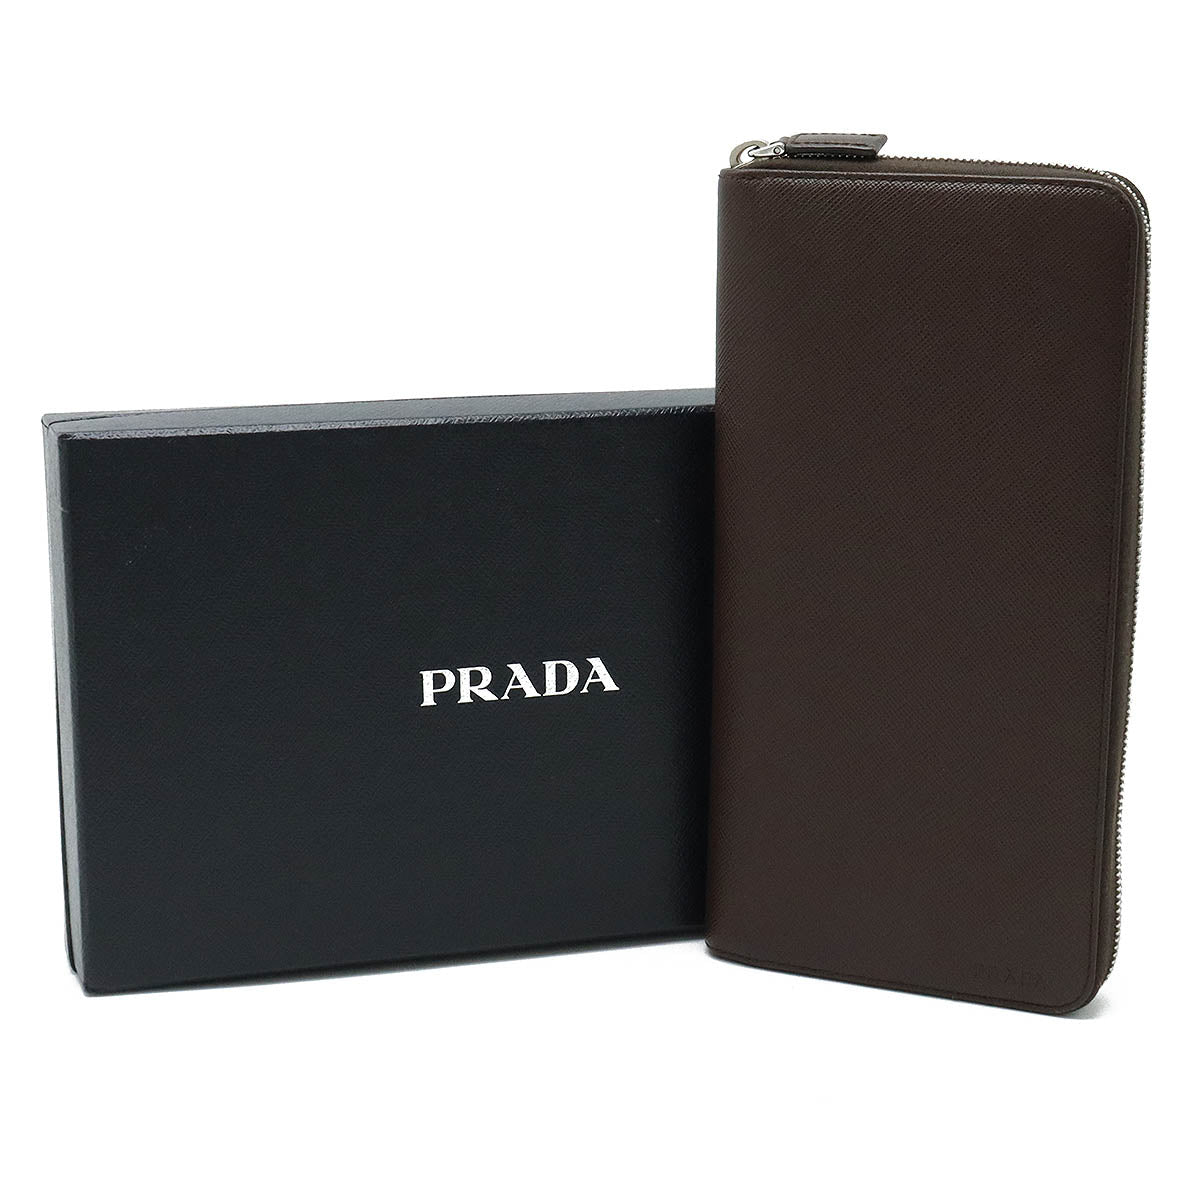 PRADA PRADA SAFFIANO1 Round FASNER Long Wallet Leather CAFFE Dark Brown Silver  Domestic Outlet Purchases 2ML220